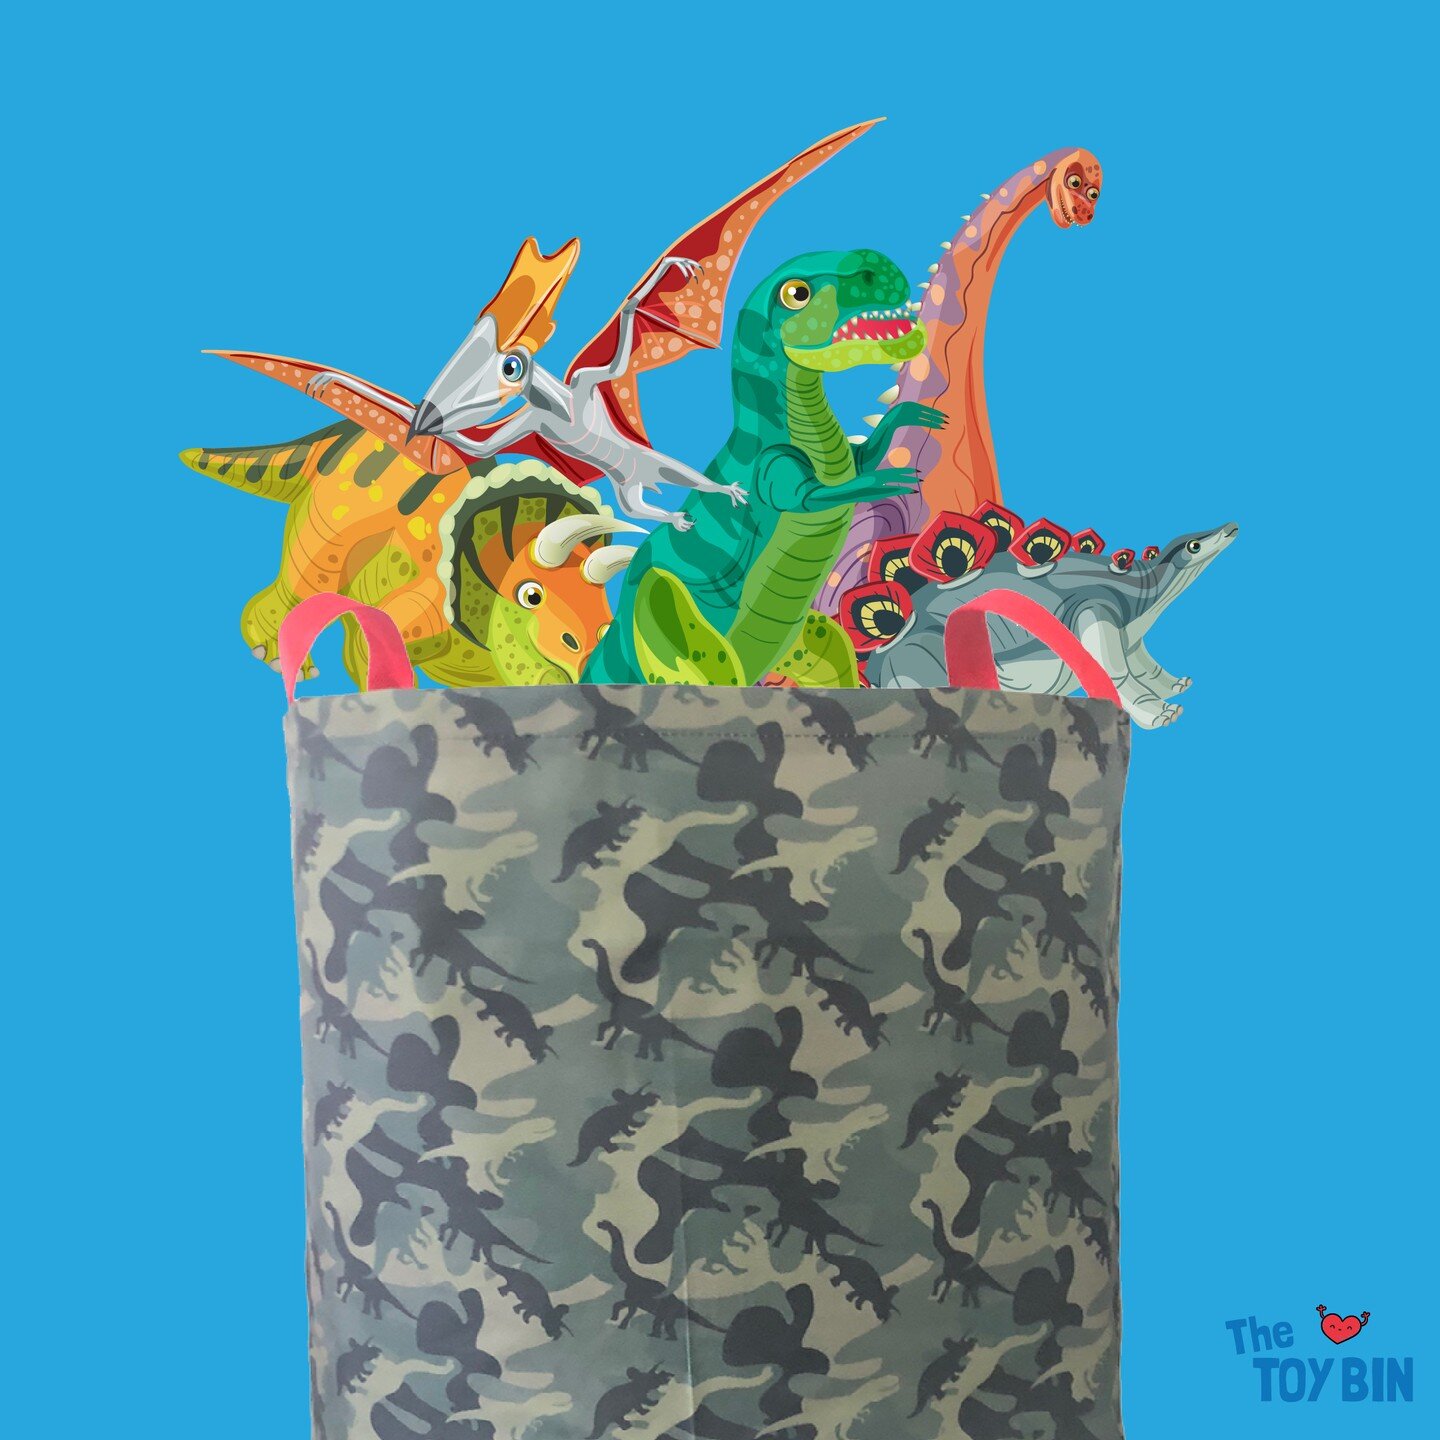 🦖✨ Calling all little explorers and dino enthusiasts! 🚀🦕
Say goodbye to clutter and hello to organized fun! Our roomy TOY BIN is the perfect solution for every parent's quest to keep the play area tidy. 🏡Let your little ones pack away their favor